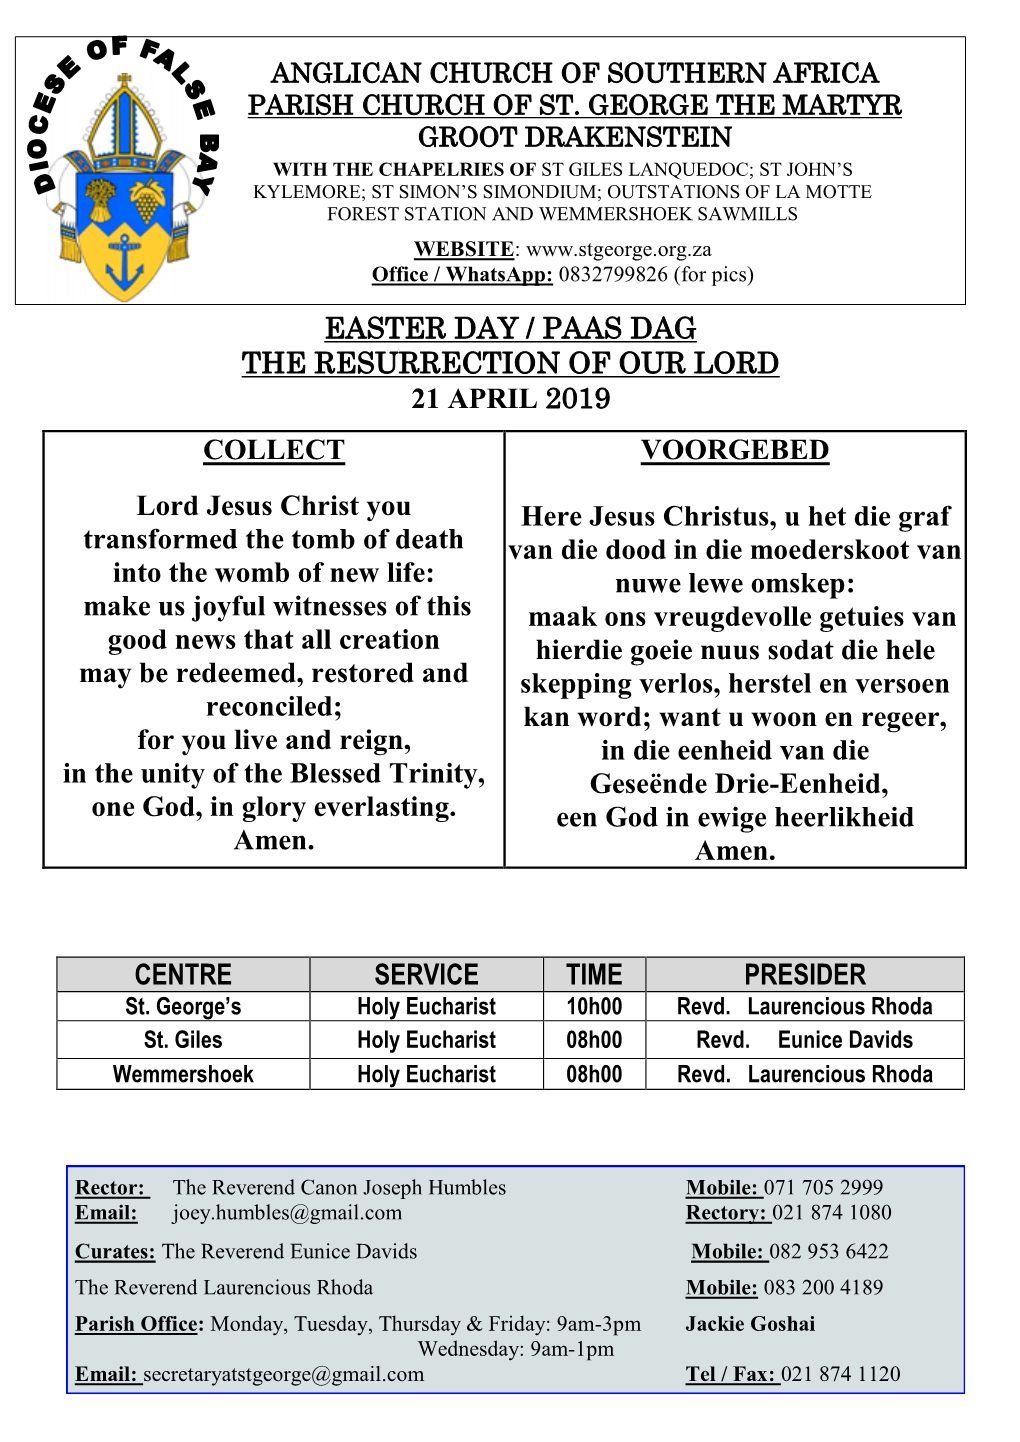 Easter Day / Paas Dag the Resurrection of Our Lord 21 April 2019 Collect Voorgebed